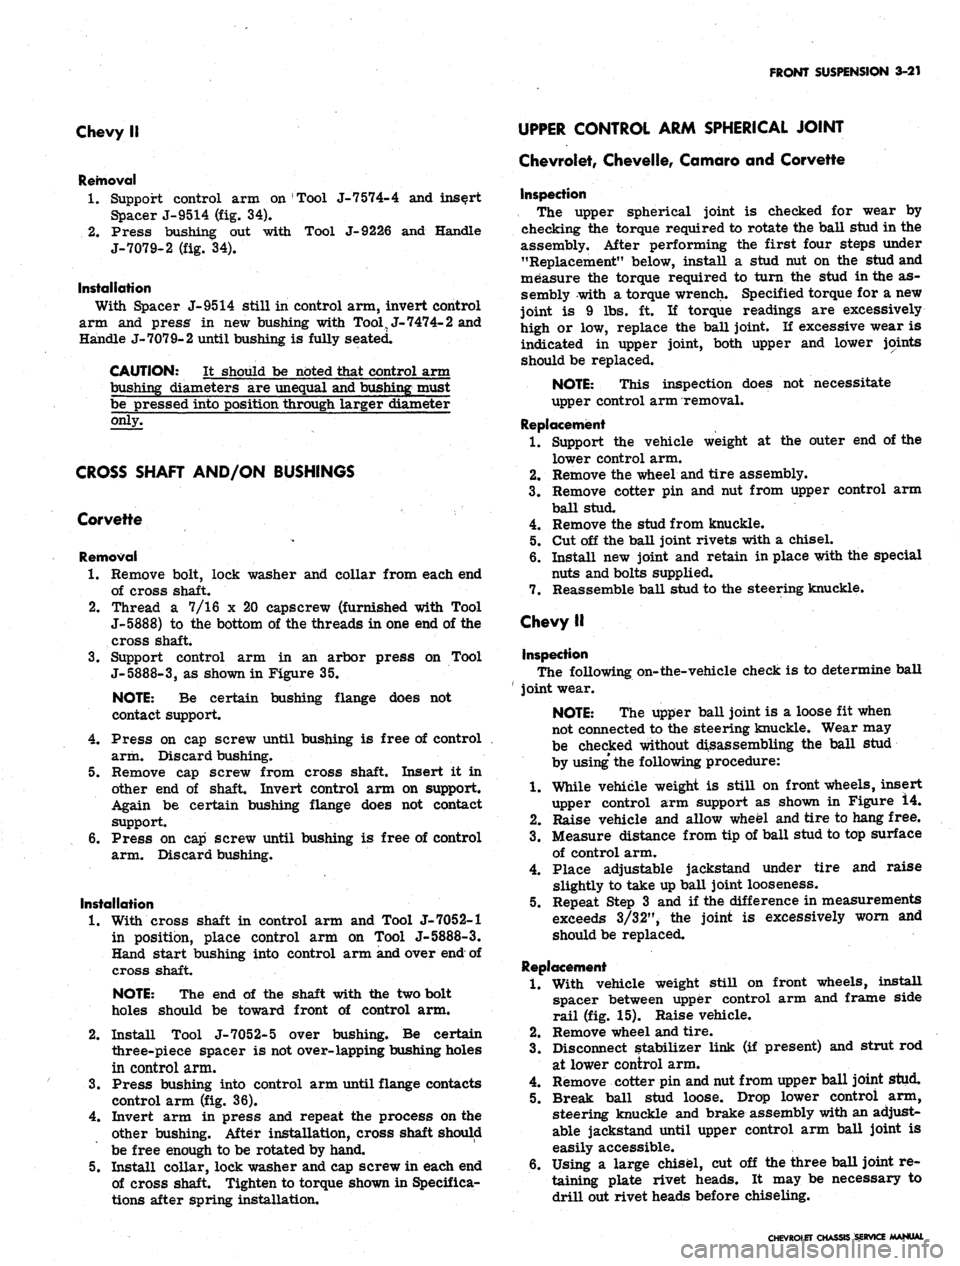 CHEVROLET CAMARO 1967 1.G Chassis Owners Manual 
FRONT SUSPENSION 3-21

Chevy II

Removal

1.
 Support control arm on Tool J-7 574-4 and insert

Spacer J-9514 (fig. 34).

2,
 Press bushing out with Tool J-9226 and Handle

J-7079-2 (fig. 34).

Insta